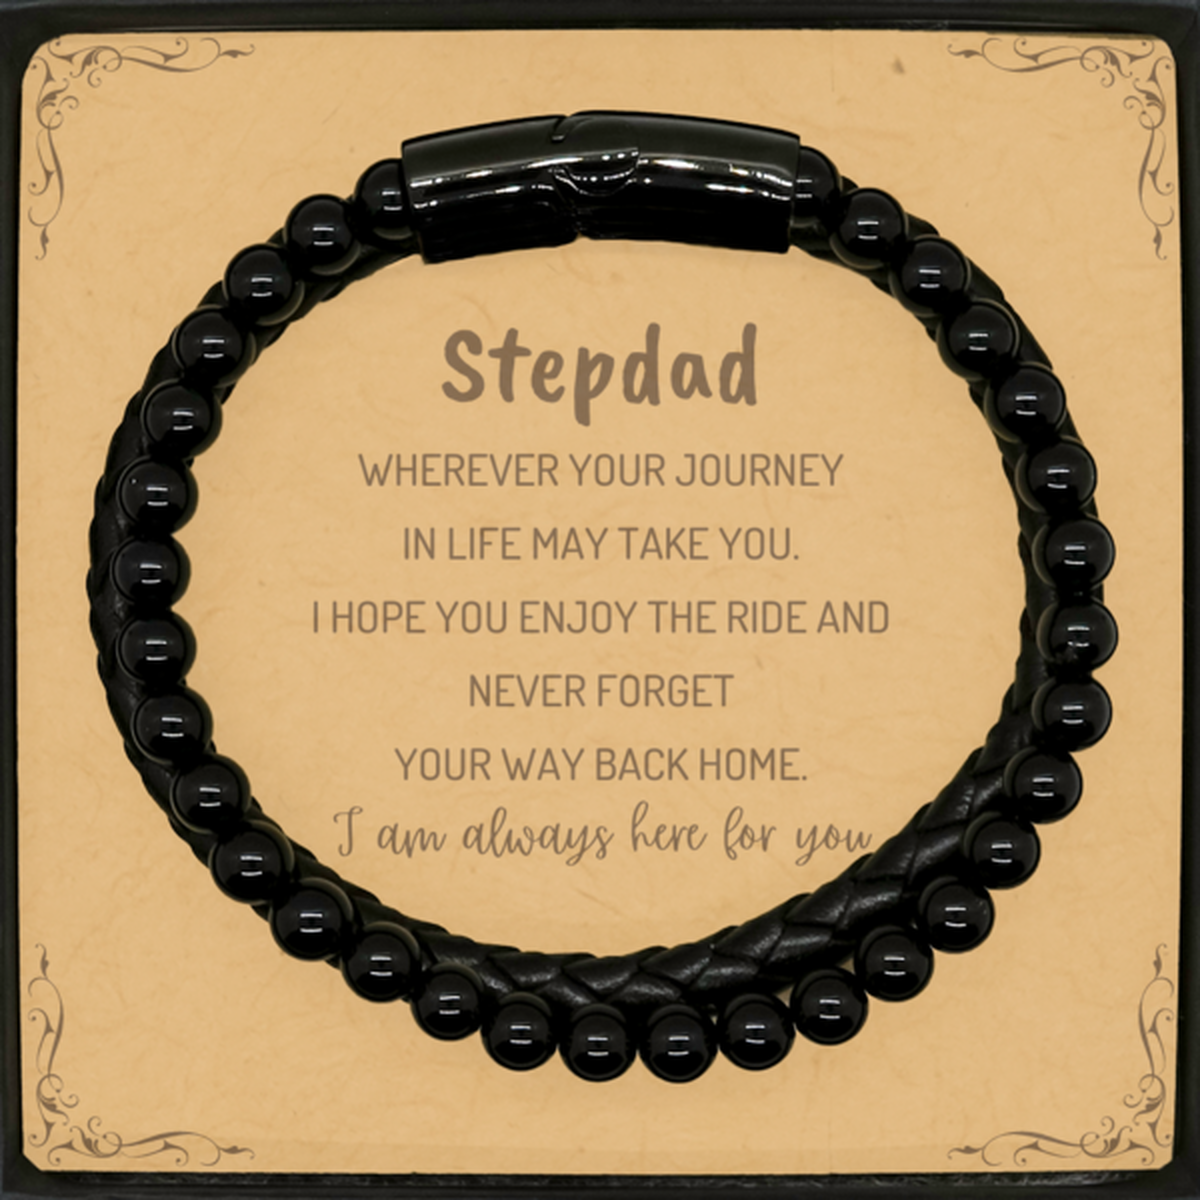 Stepdad wherever your journey in life may take you, I am always here for you Stepdad Stone Leather Bracelets, Awesome Christmas Gifts For Stepdad Message Card, Stepdad Birthday Gifts for Men Women Family Loved One